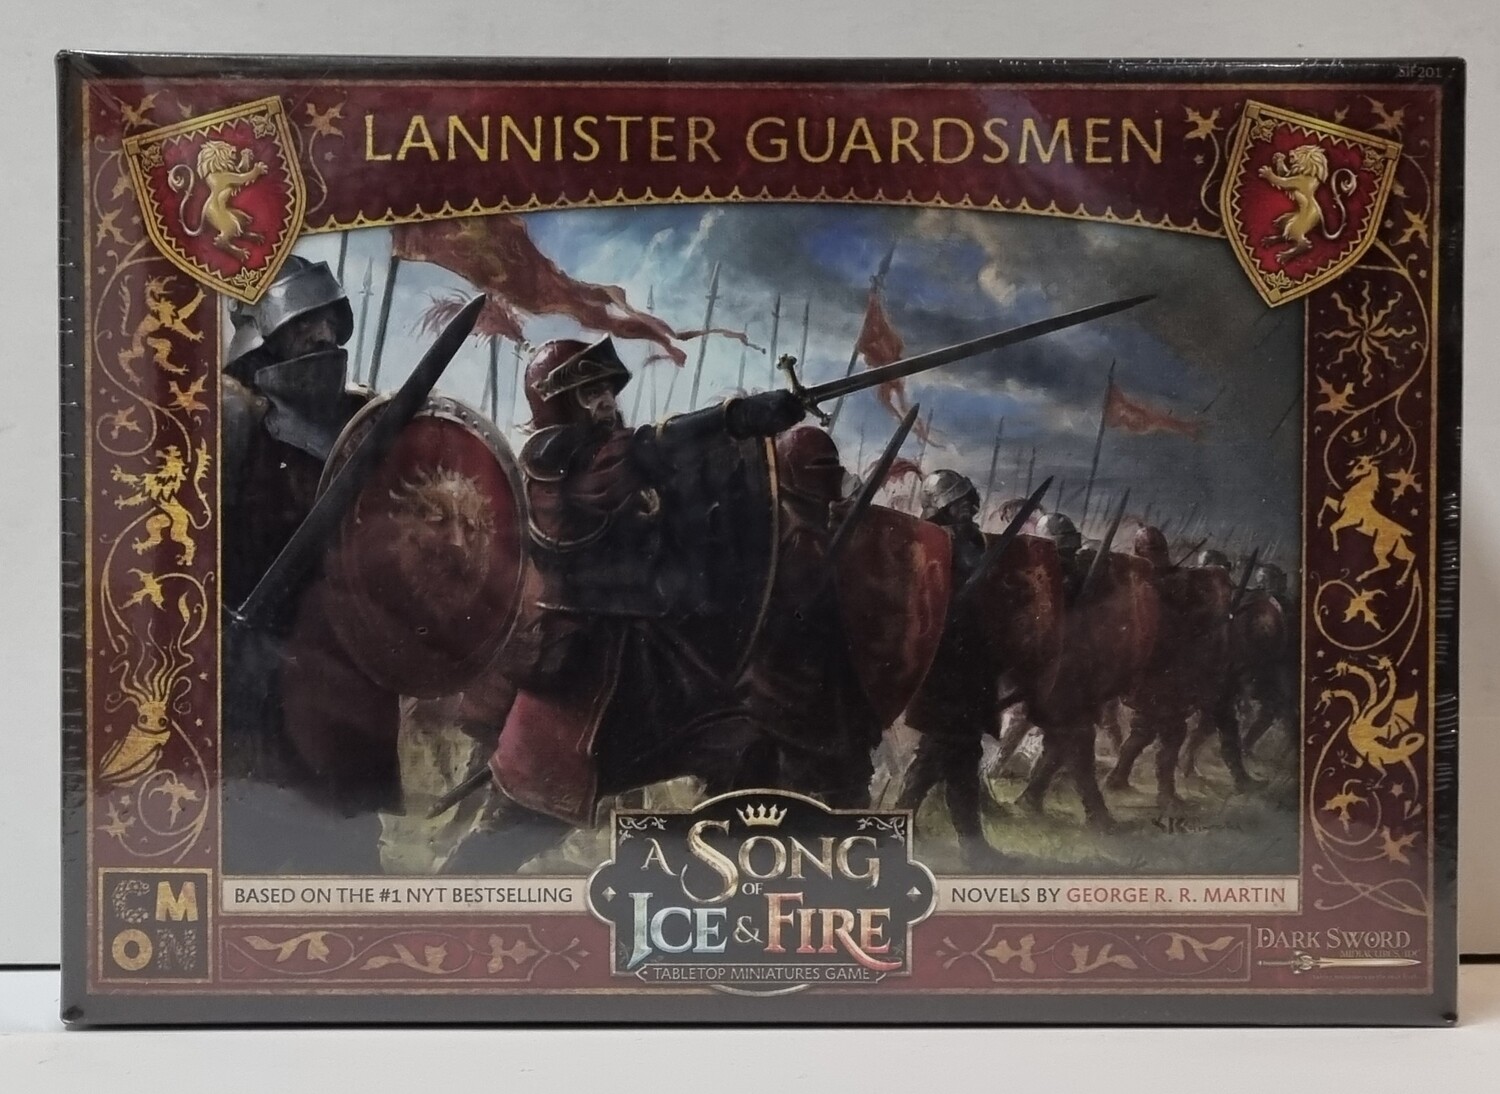 A Song of Ice & Fire, SIF201, Lannister Guardsmen